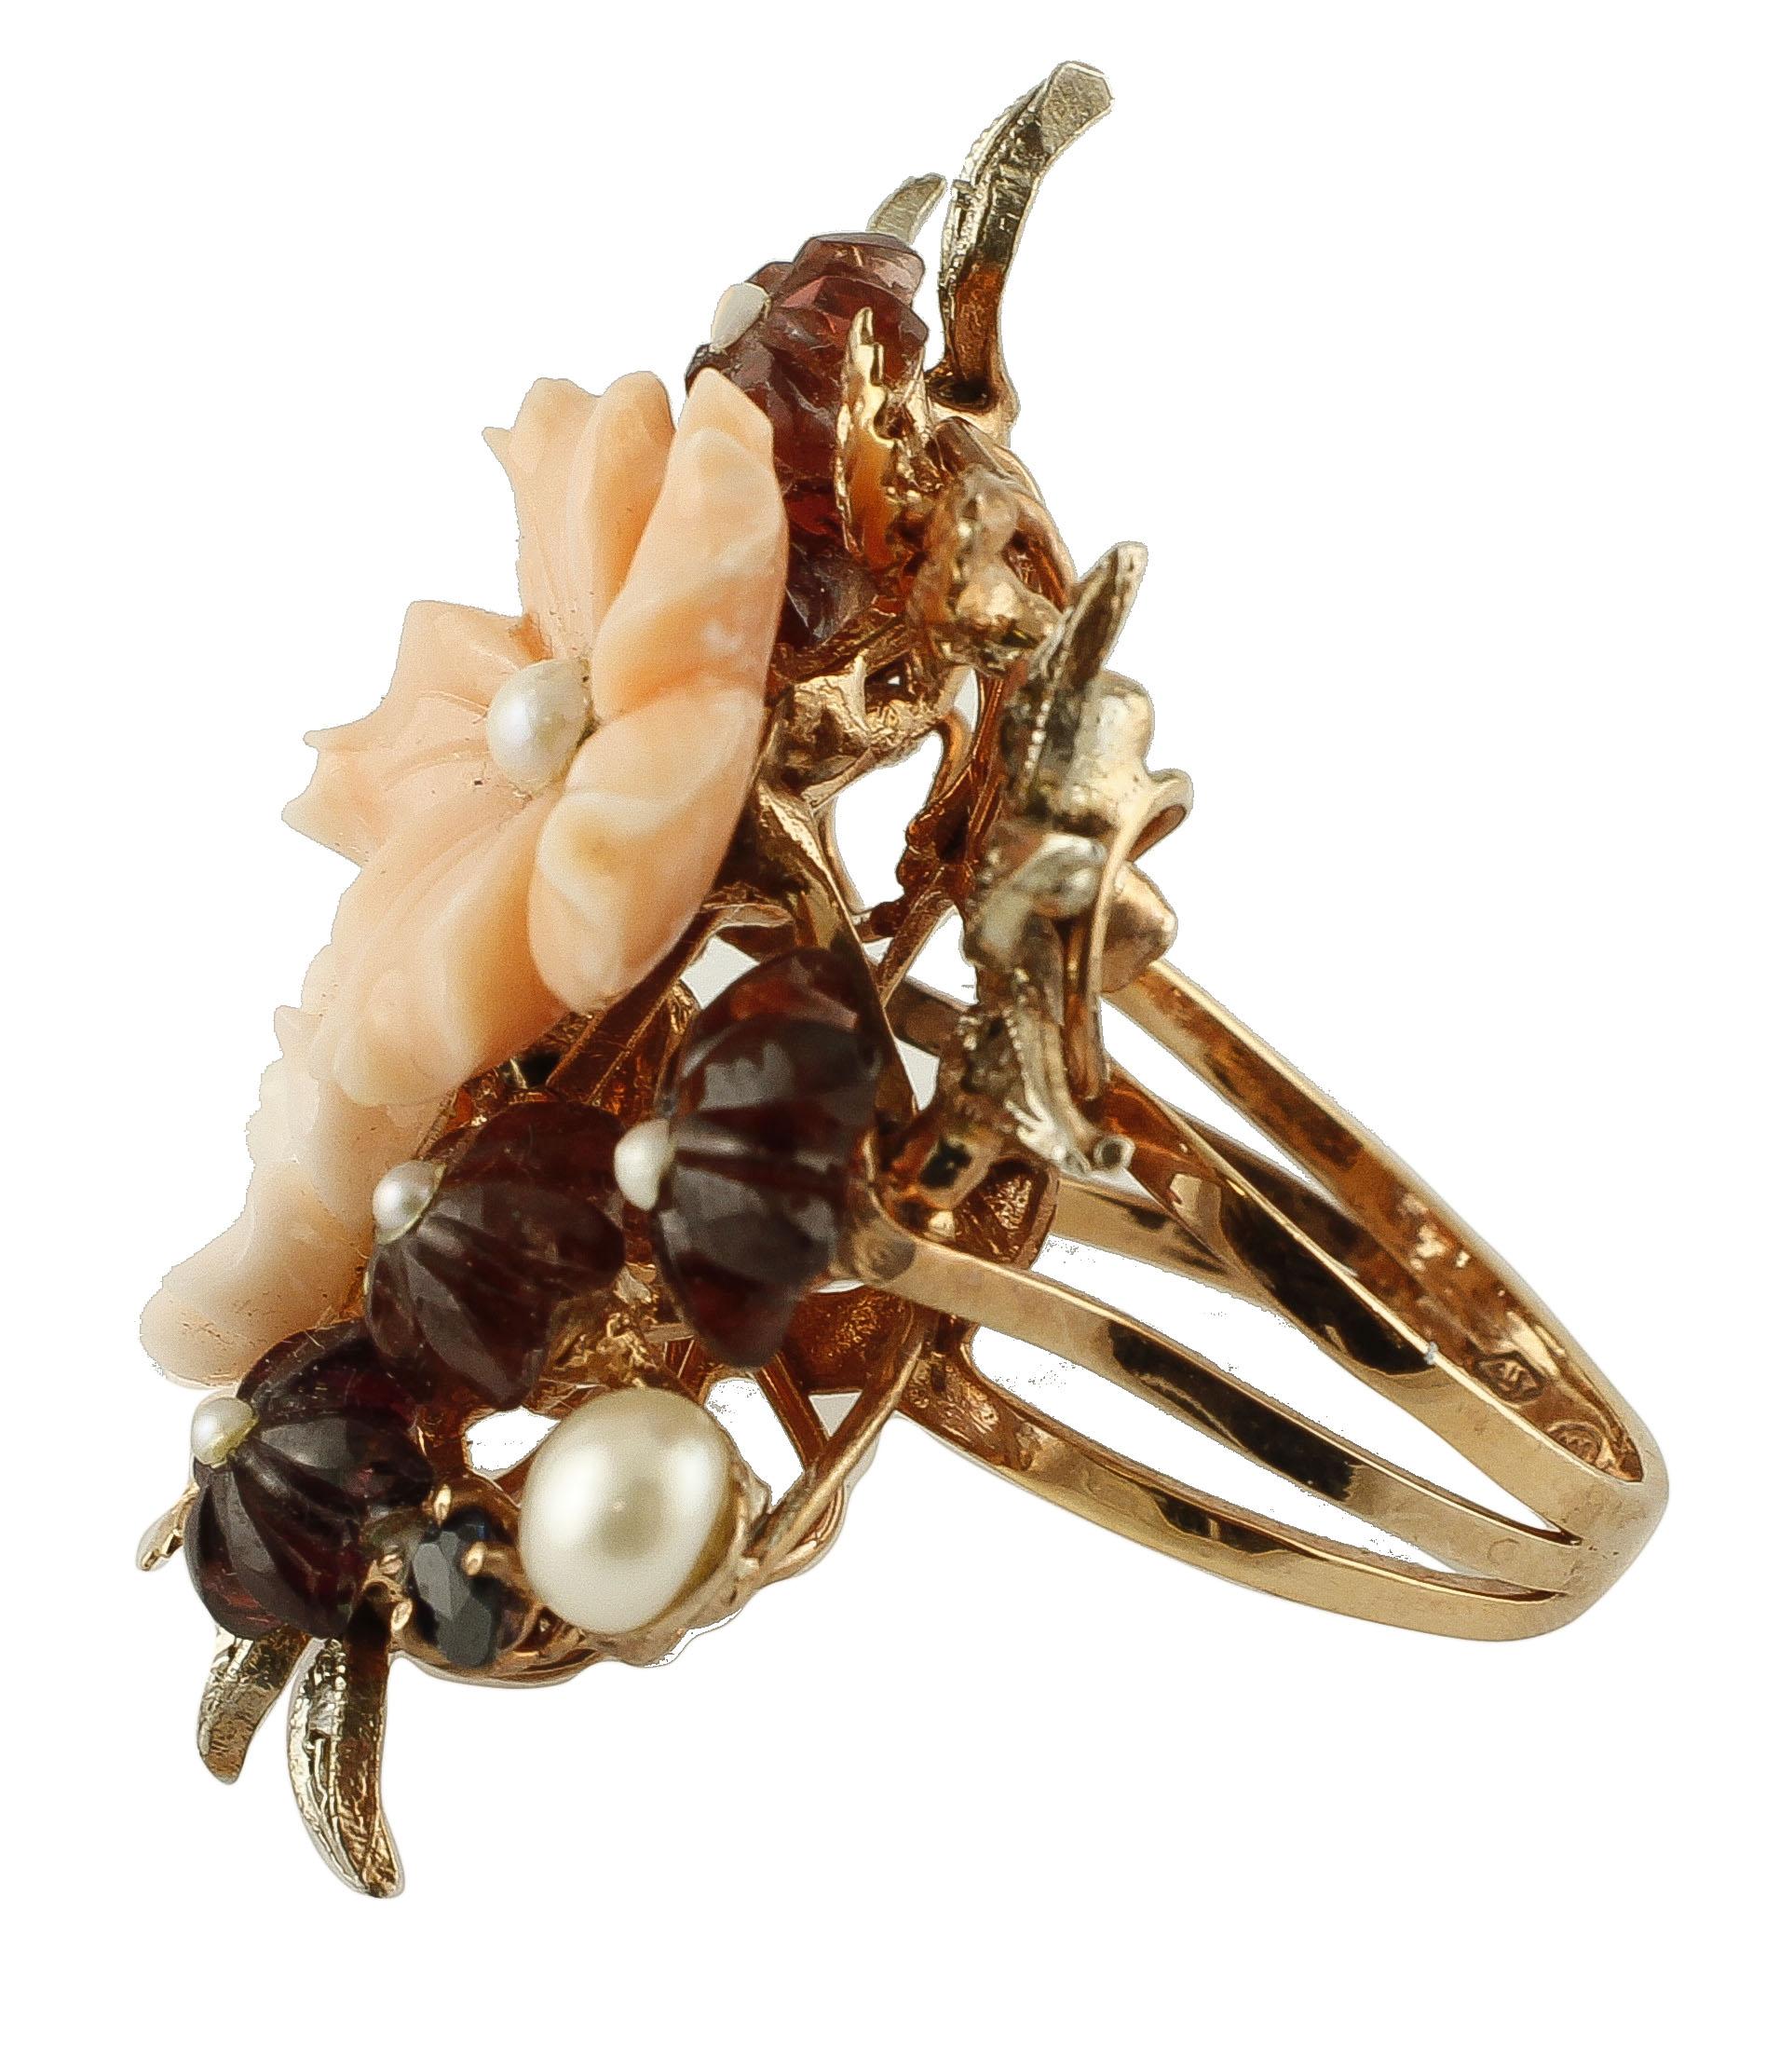 Beautiful flowery ring in 9k rose gold and silver  structure. The ring features 2 secundum coral flowers with central little pearls and many little flowers all around made of garnets pearls. The ring is also enriched by flowery decoration in rose